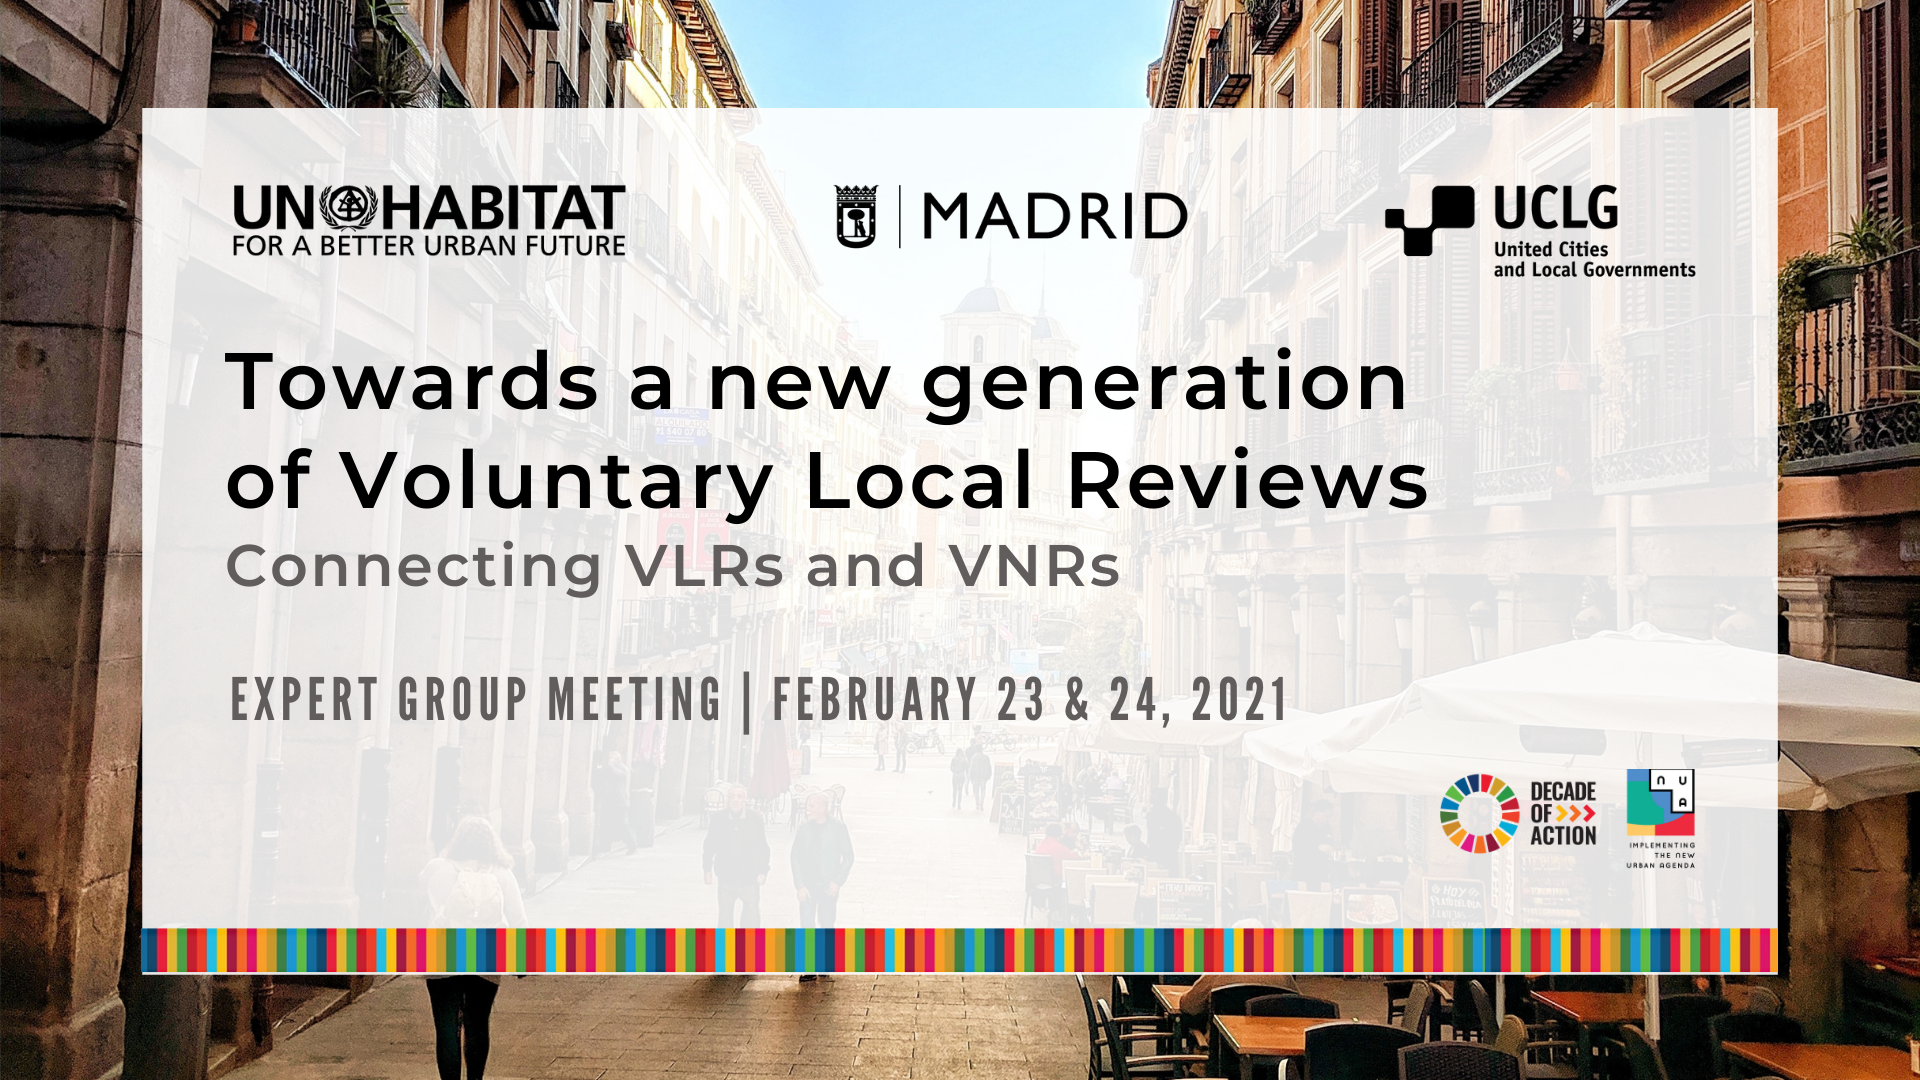 Expert Group Meeting (EGM) Towards a new generation of Voluntary Local Reviews: Connecting VLRs and VNRs